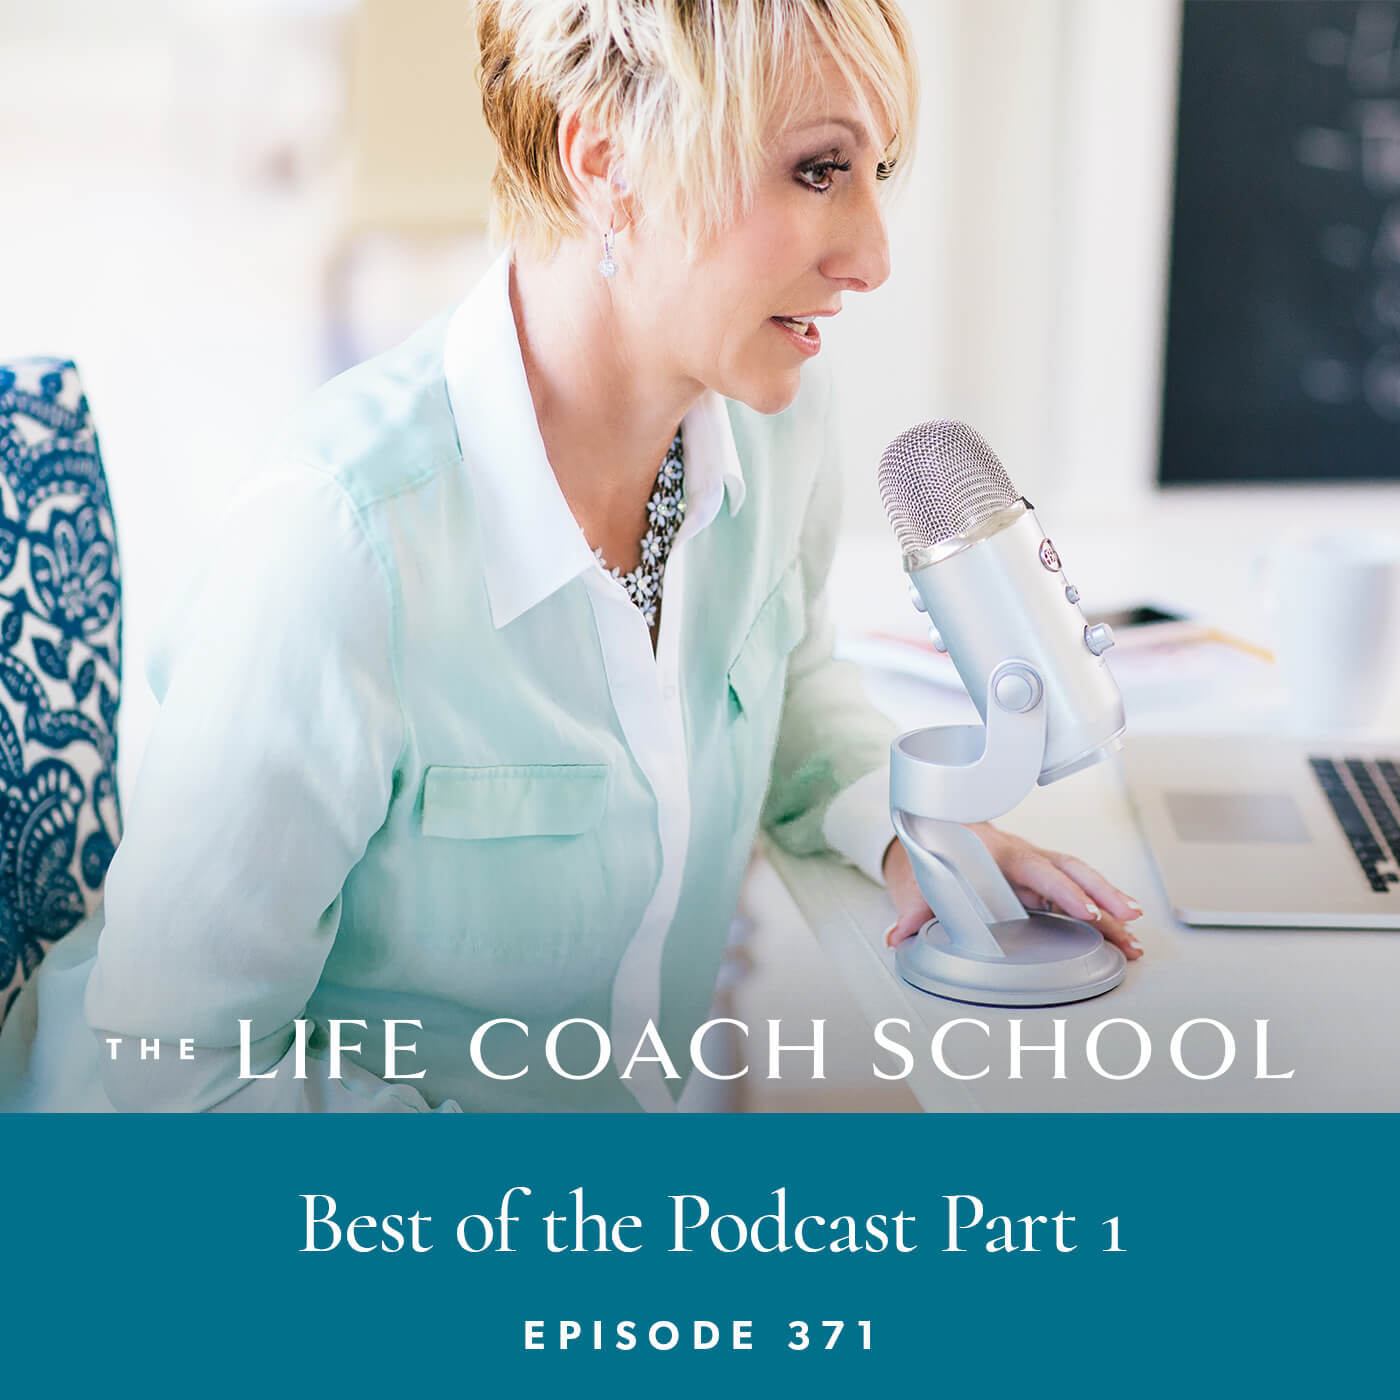 The Life Coach School Podcast with Brooke Castillo | Best of the Podcast Part 1